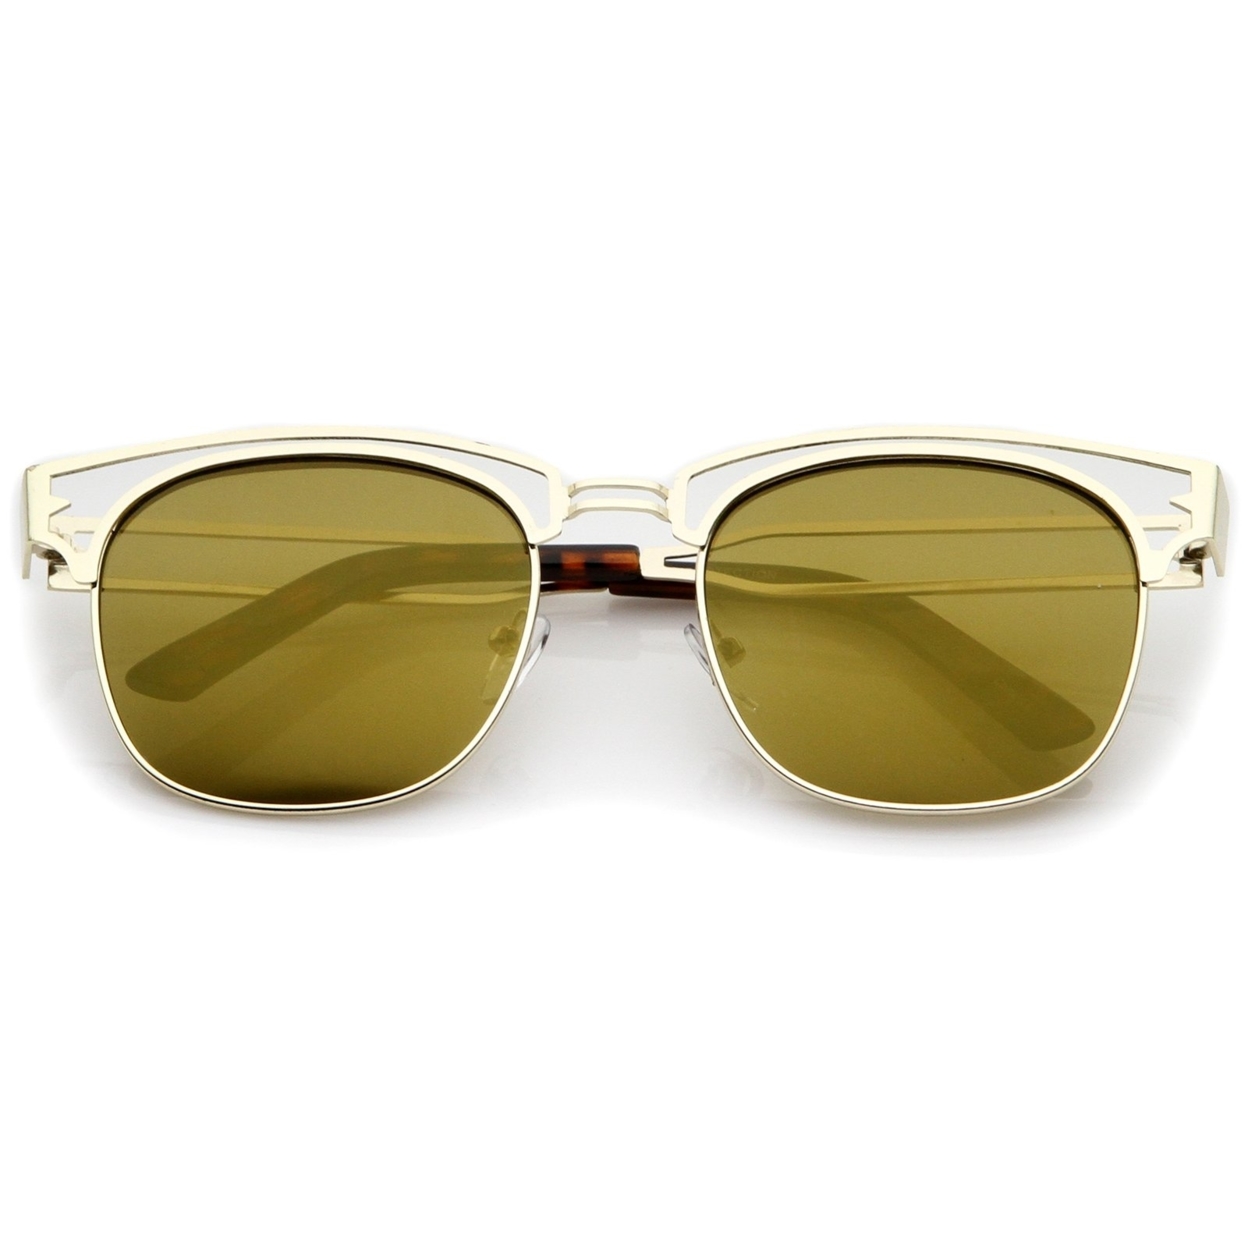 Modern Open Metal Colored Mirror Square Flat Lens Horn Rimmed Sunglasses 53mm - Gold / Pink Mirror